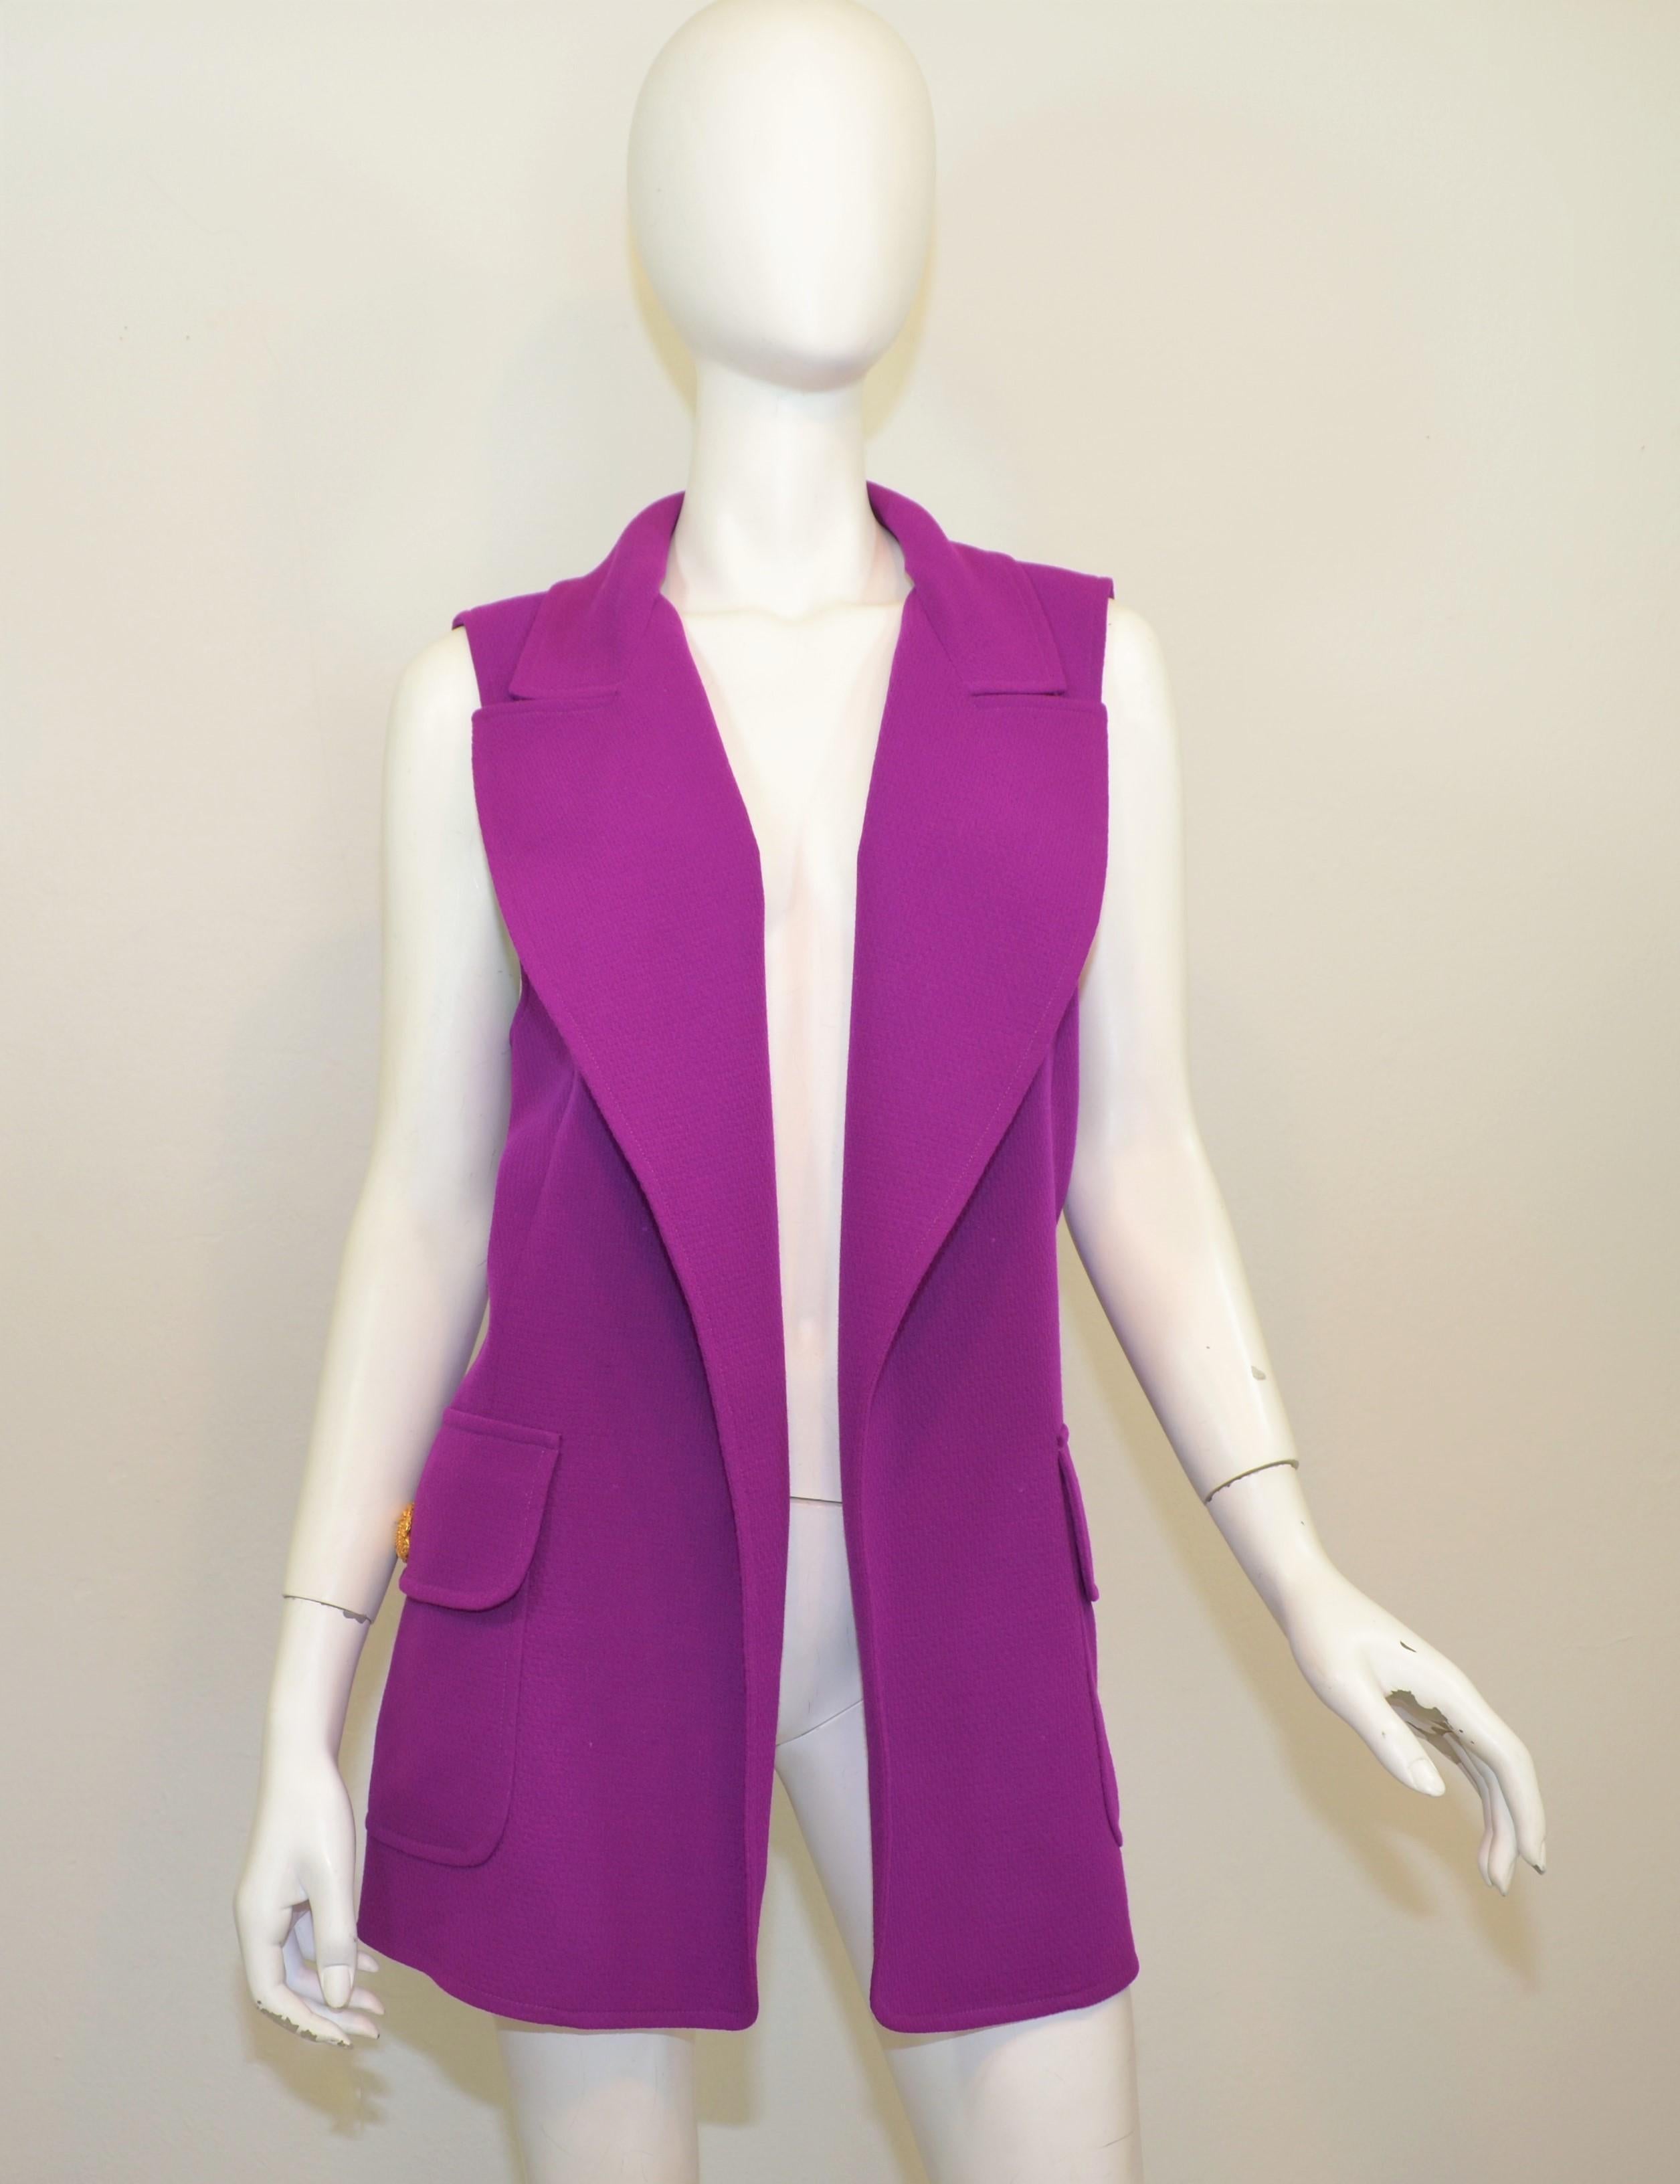 Vintage Gianni Versace Couture Vest featured in a bright purple composed with a wool-like fabric (there is not a contents label attached) and functional flap pockets with gold-tone button closures. Vest is in wonderful vintage condition with a small